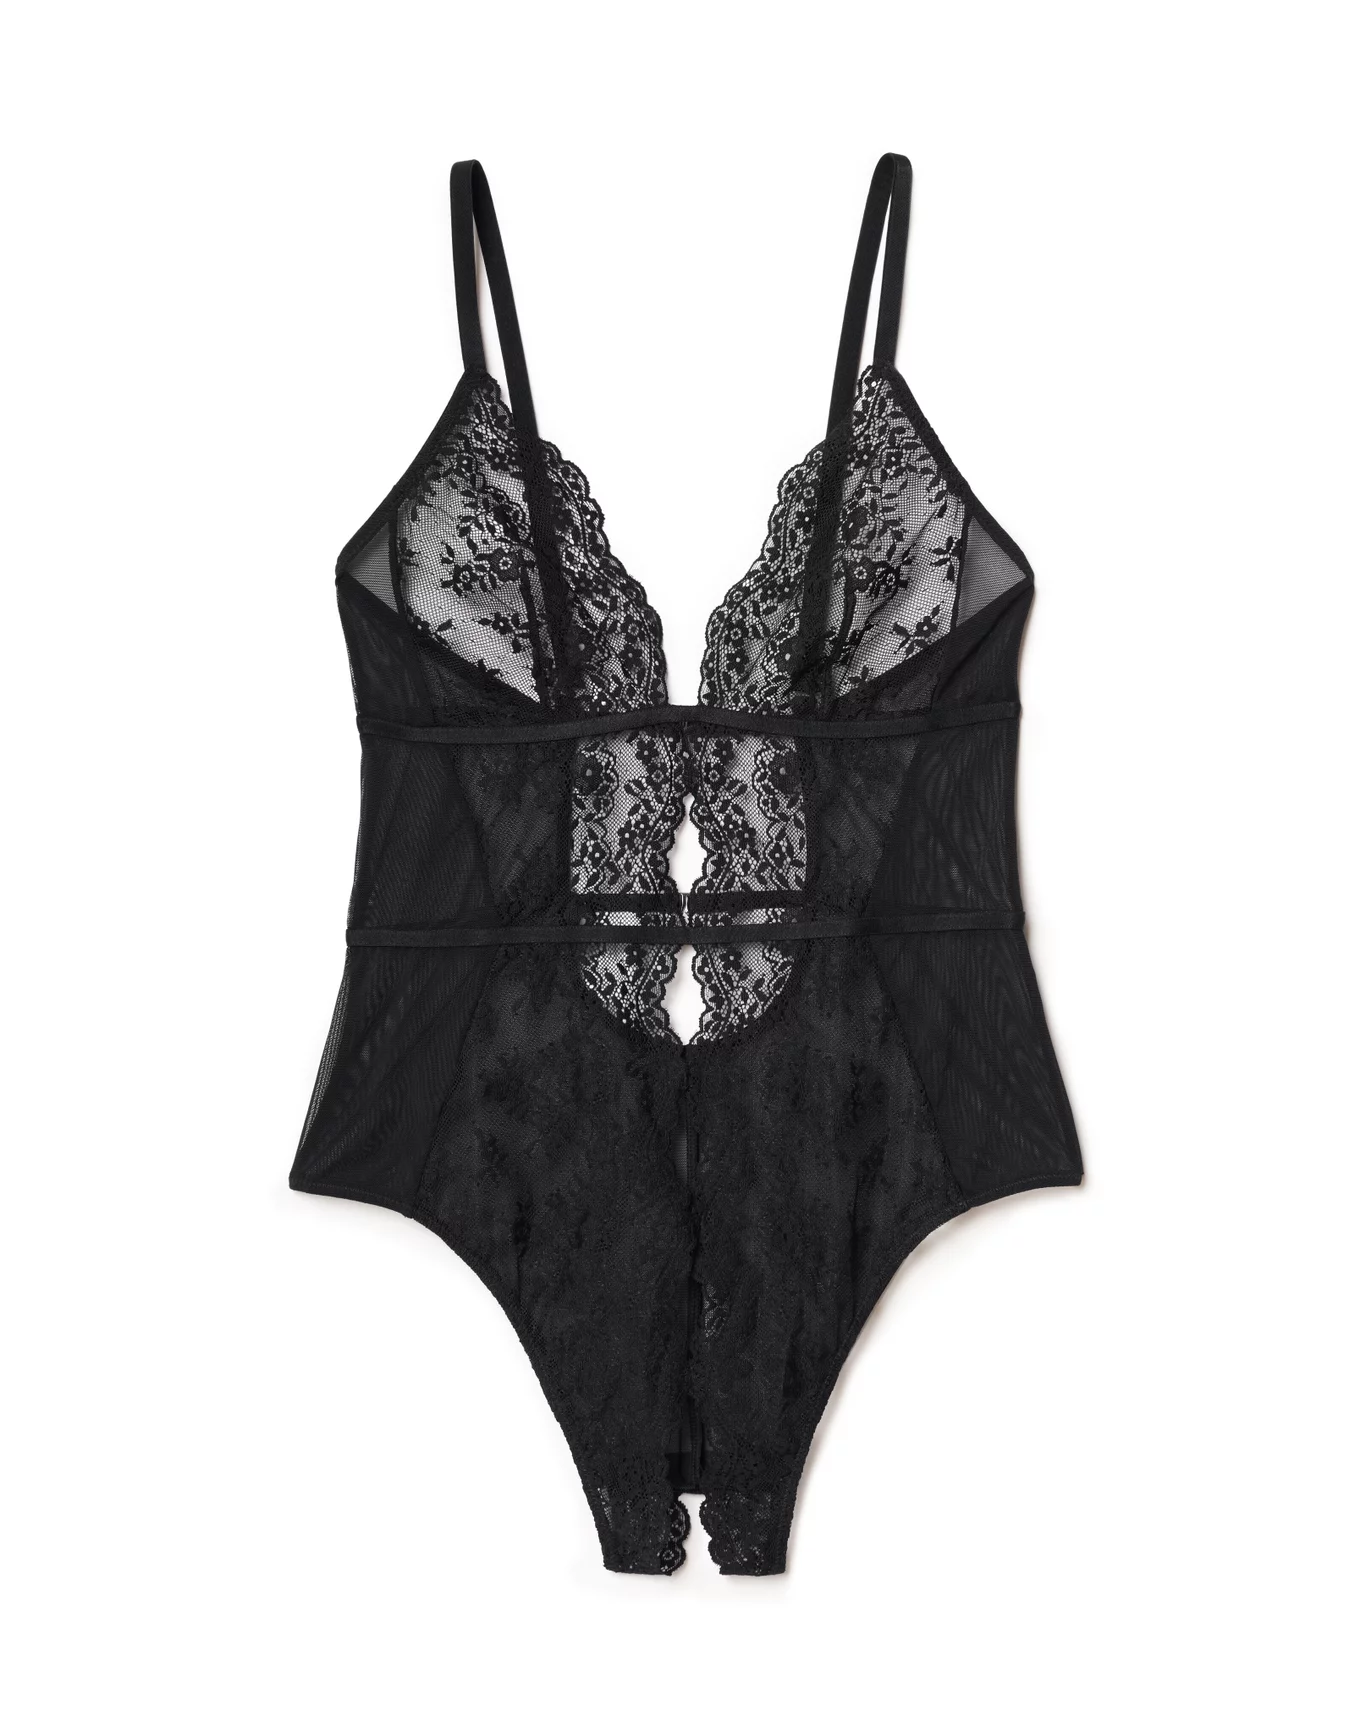 My Totally Honest Adore Me Review: Is The Lingerie Worth It?